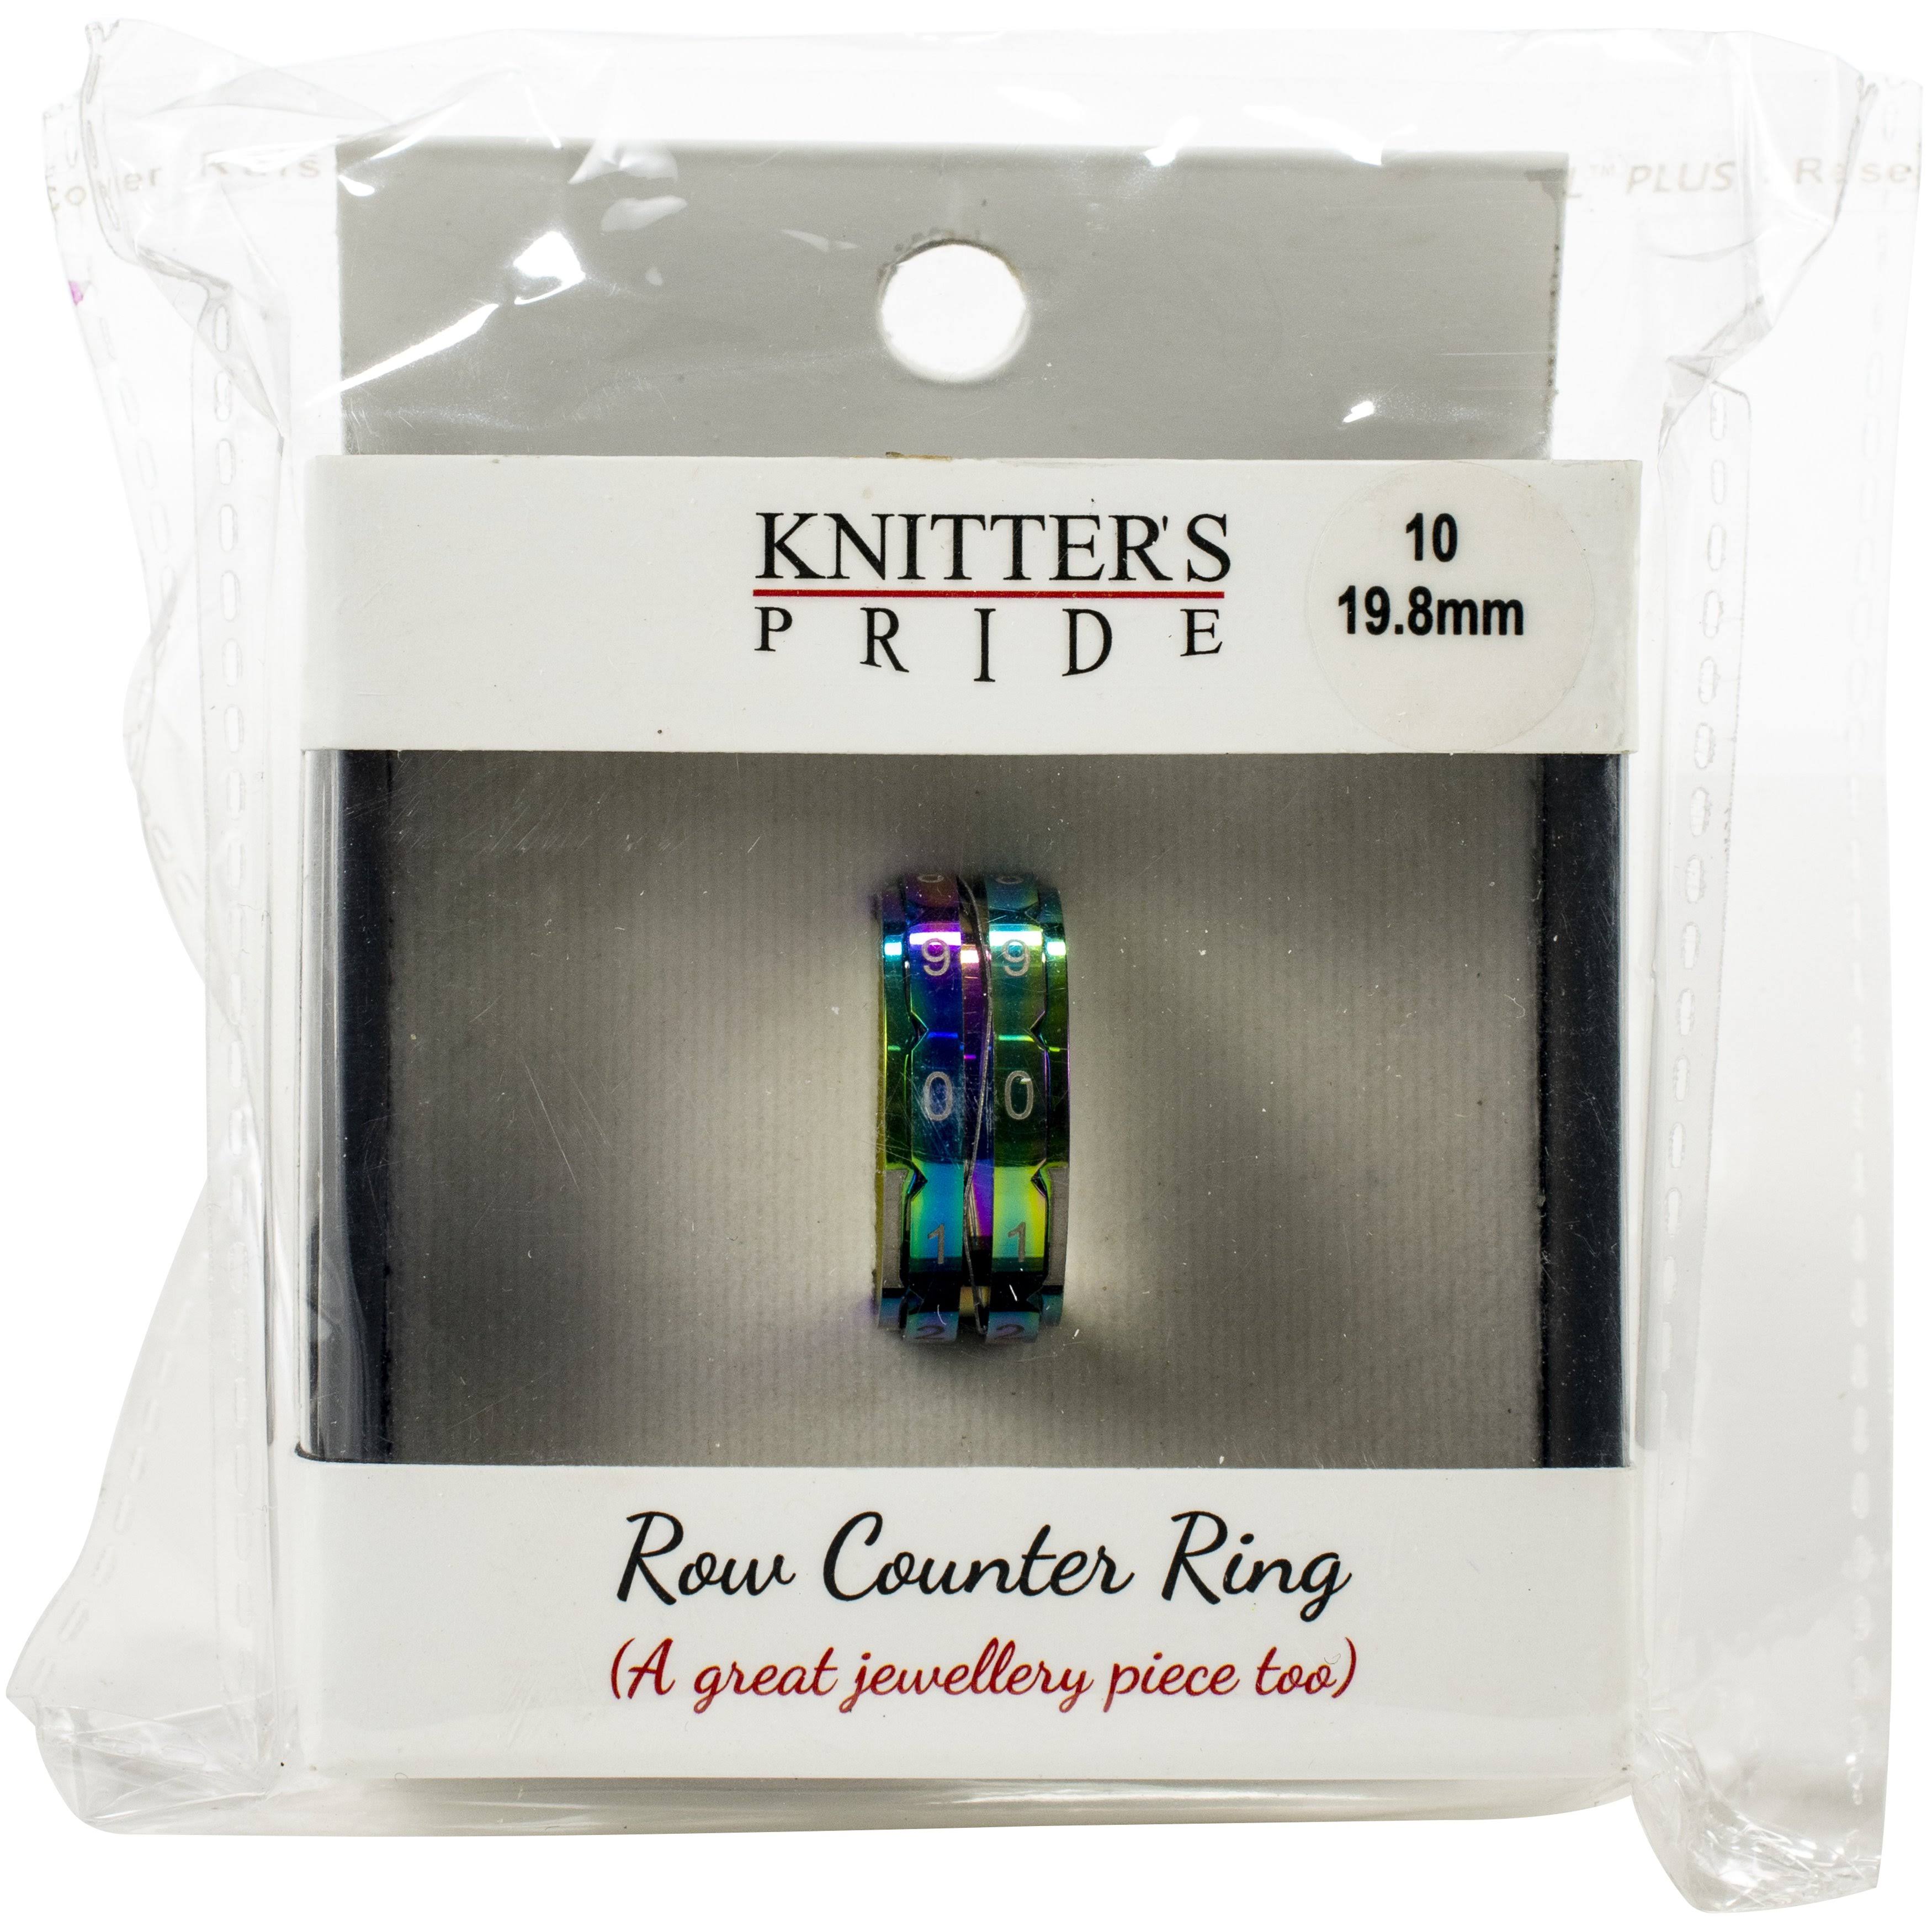 Knitter's Pride Rainbow Row counter Ring-Size 10: 19.8mm Diameter